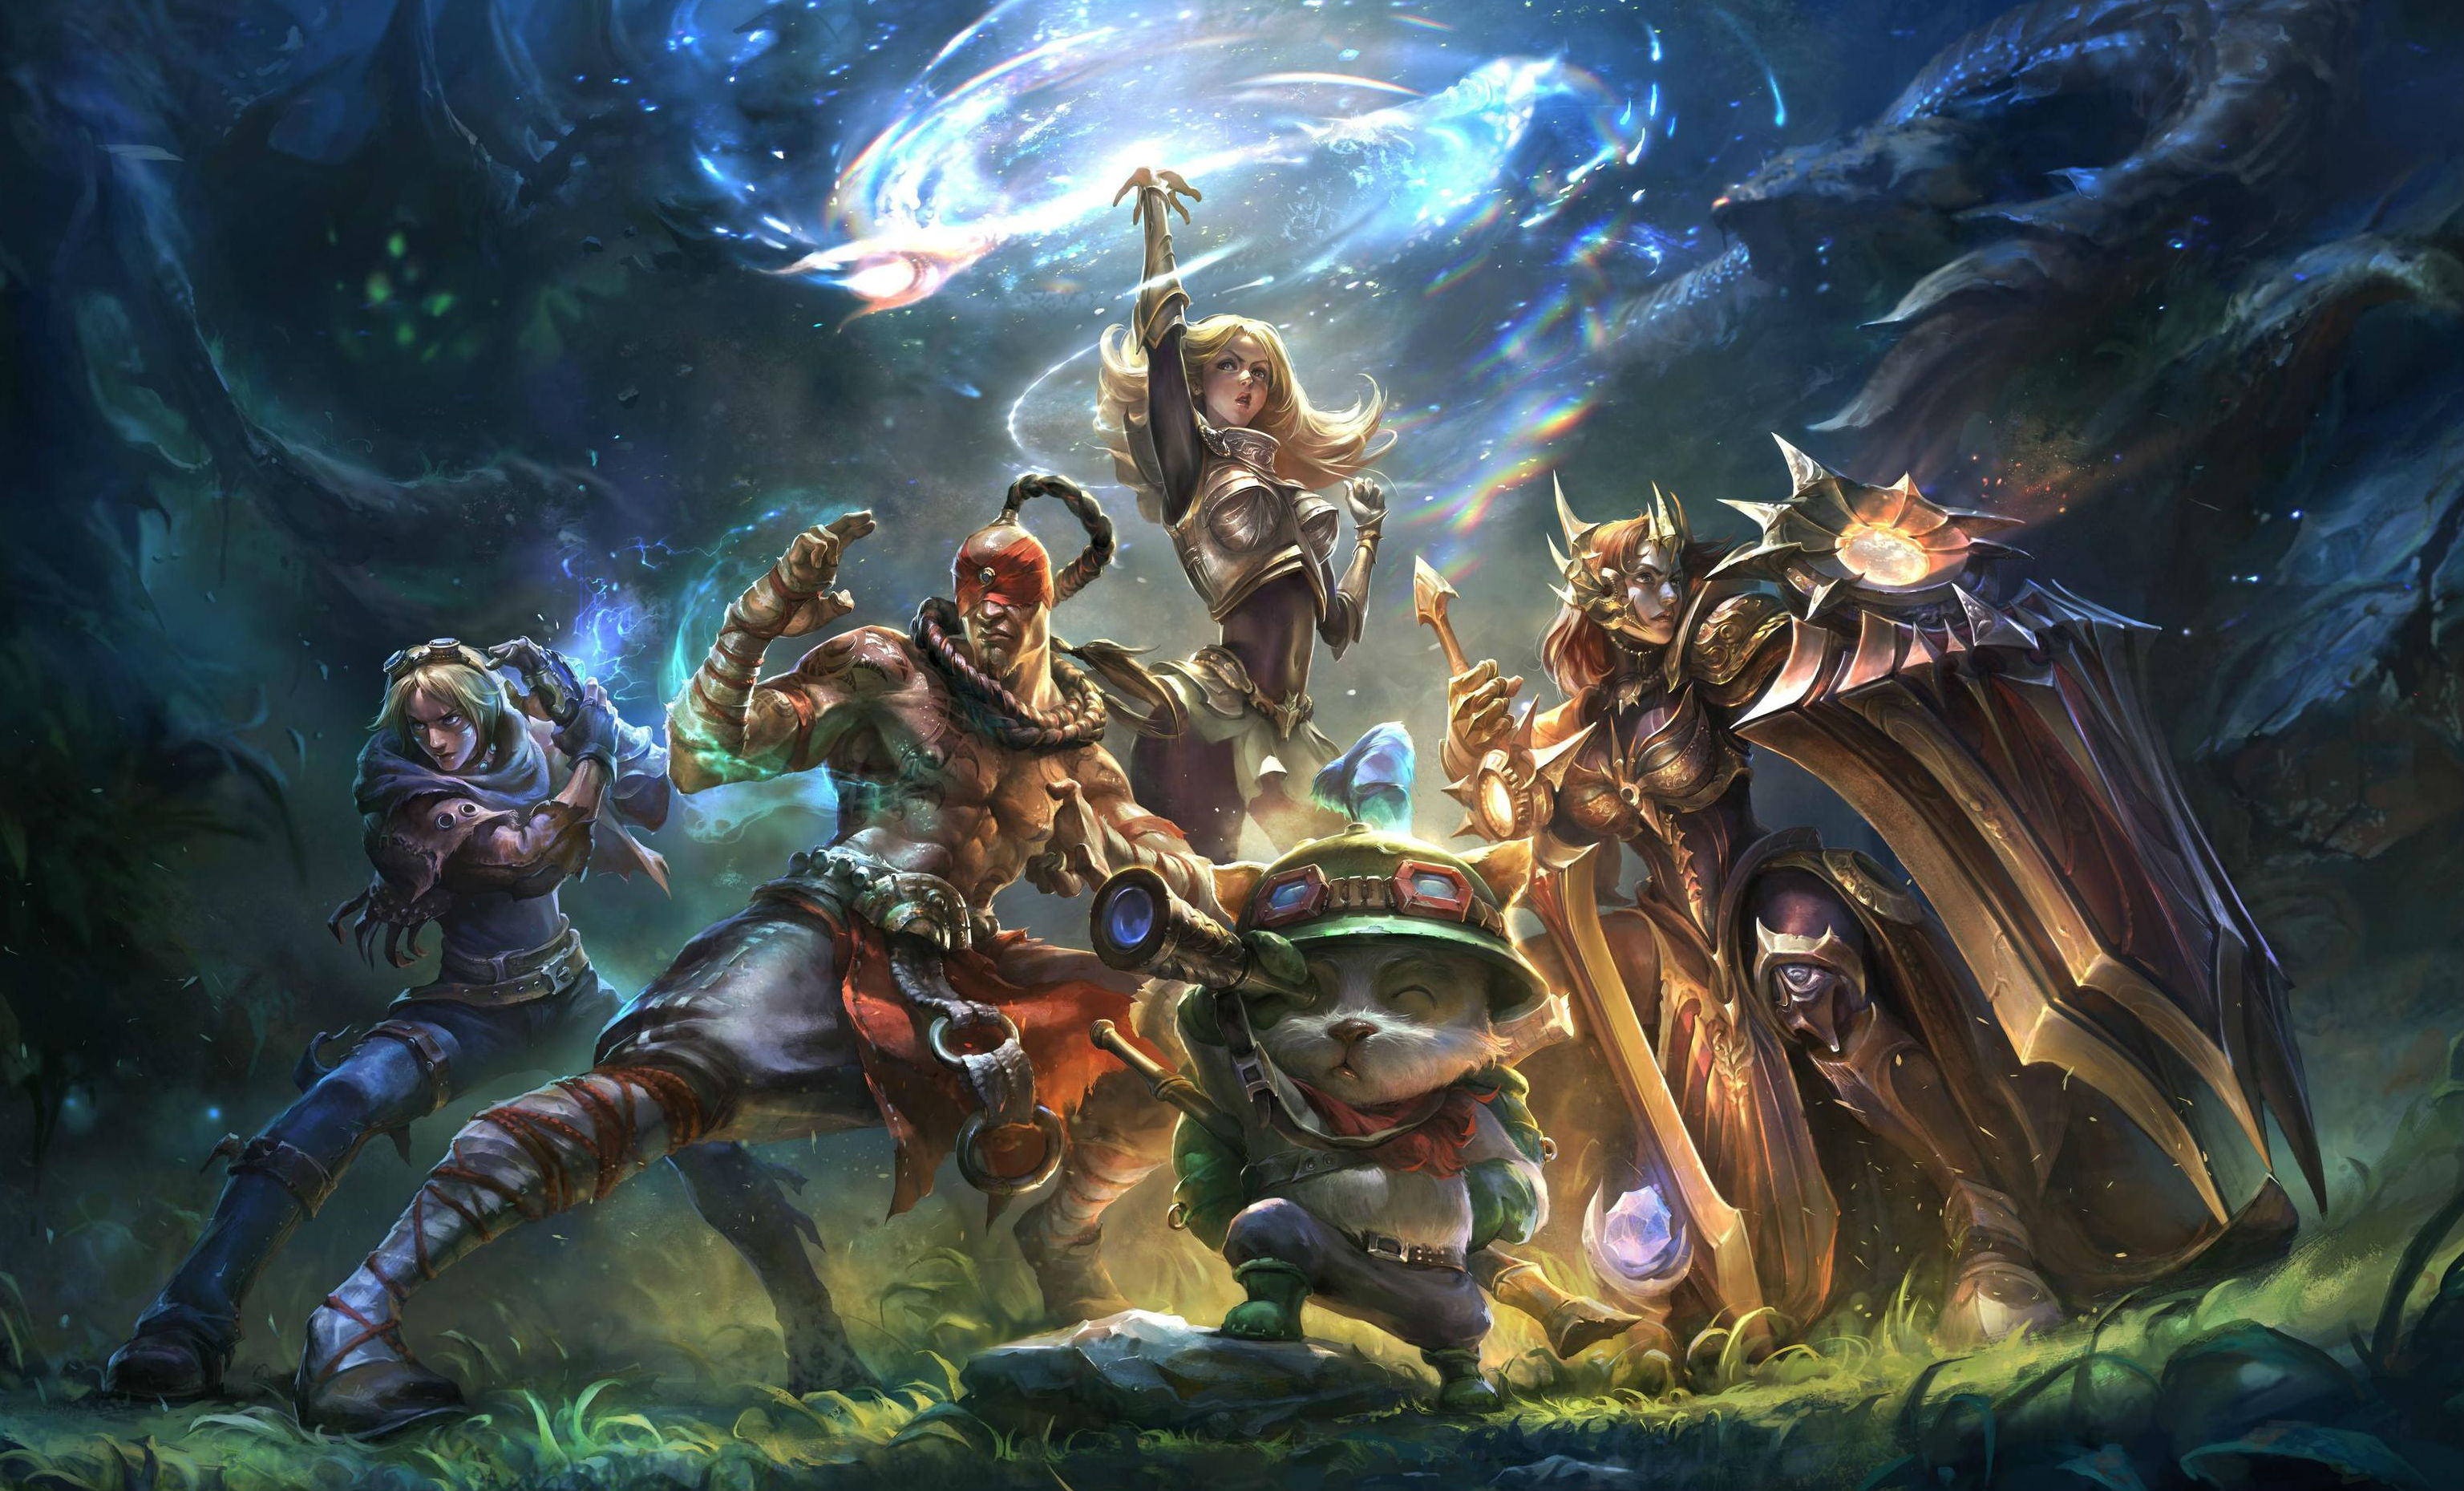 koncert pilot eksistens What does it take to build a League of Legends champion? | PC Gamer